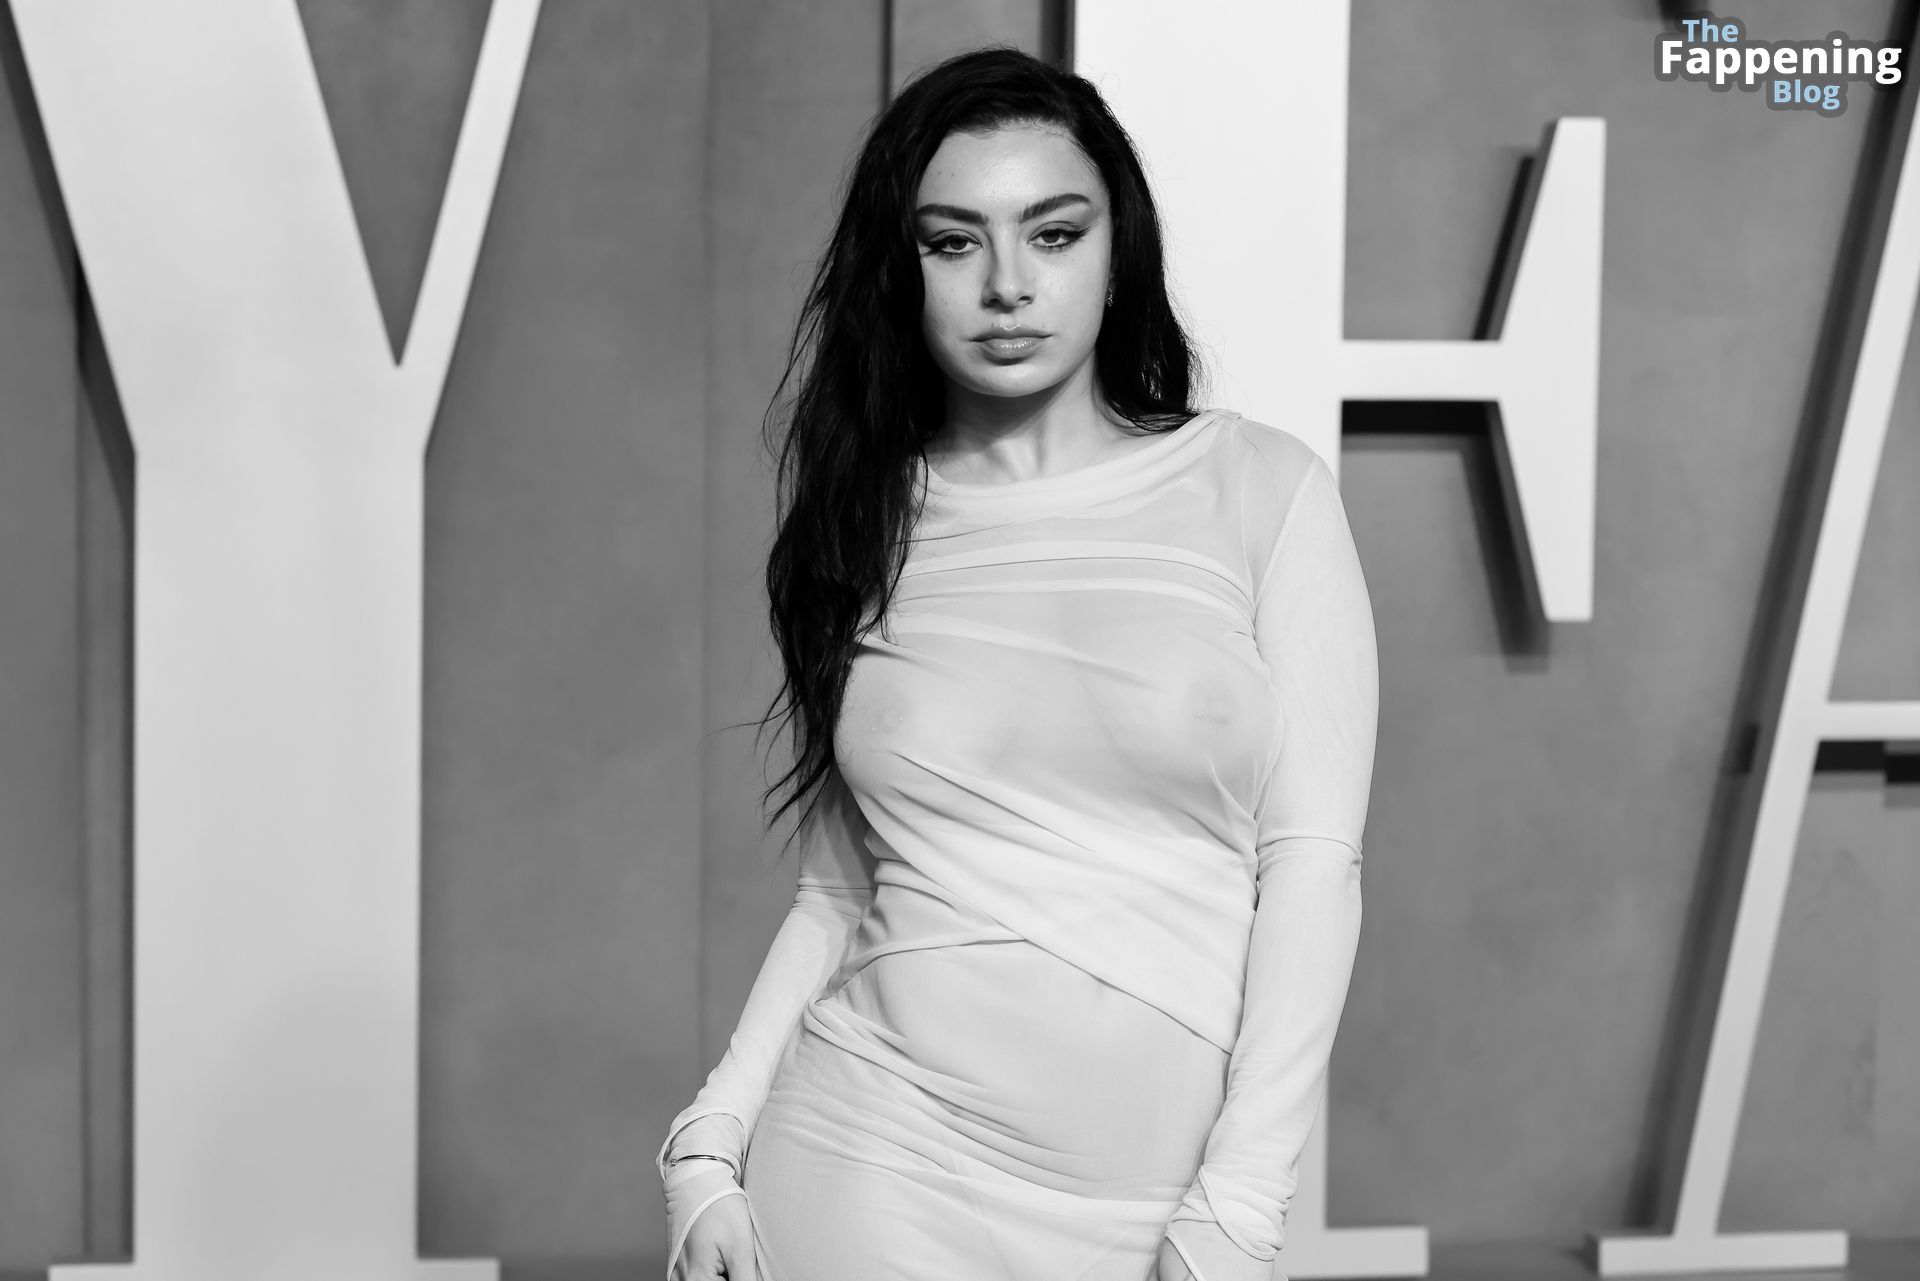 Charli-XCX-Nude-Sexy-21-The-Fappening-Blog.jpg